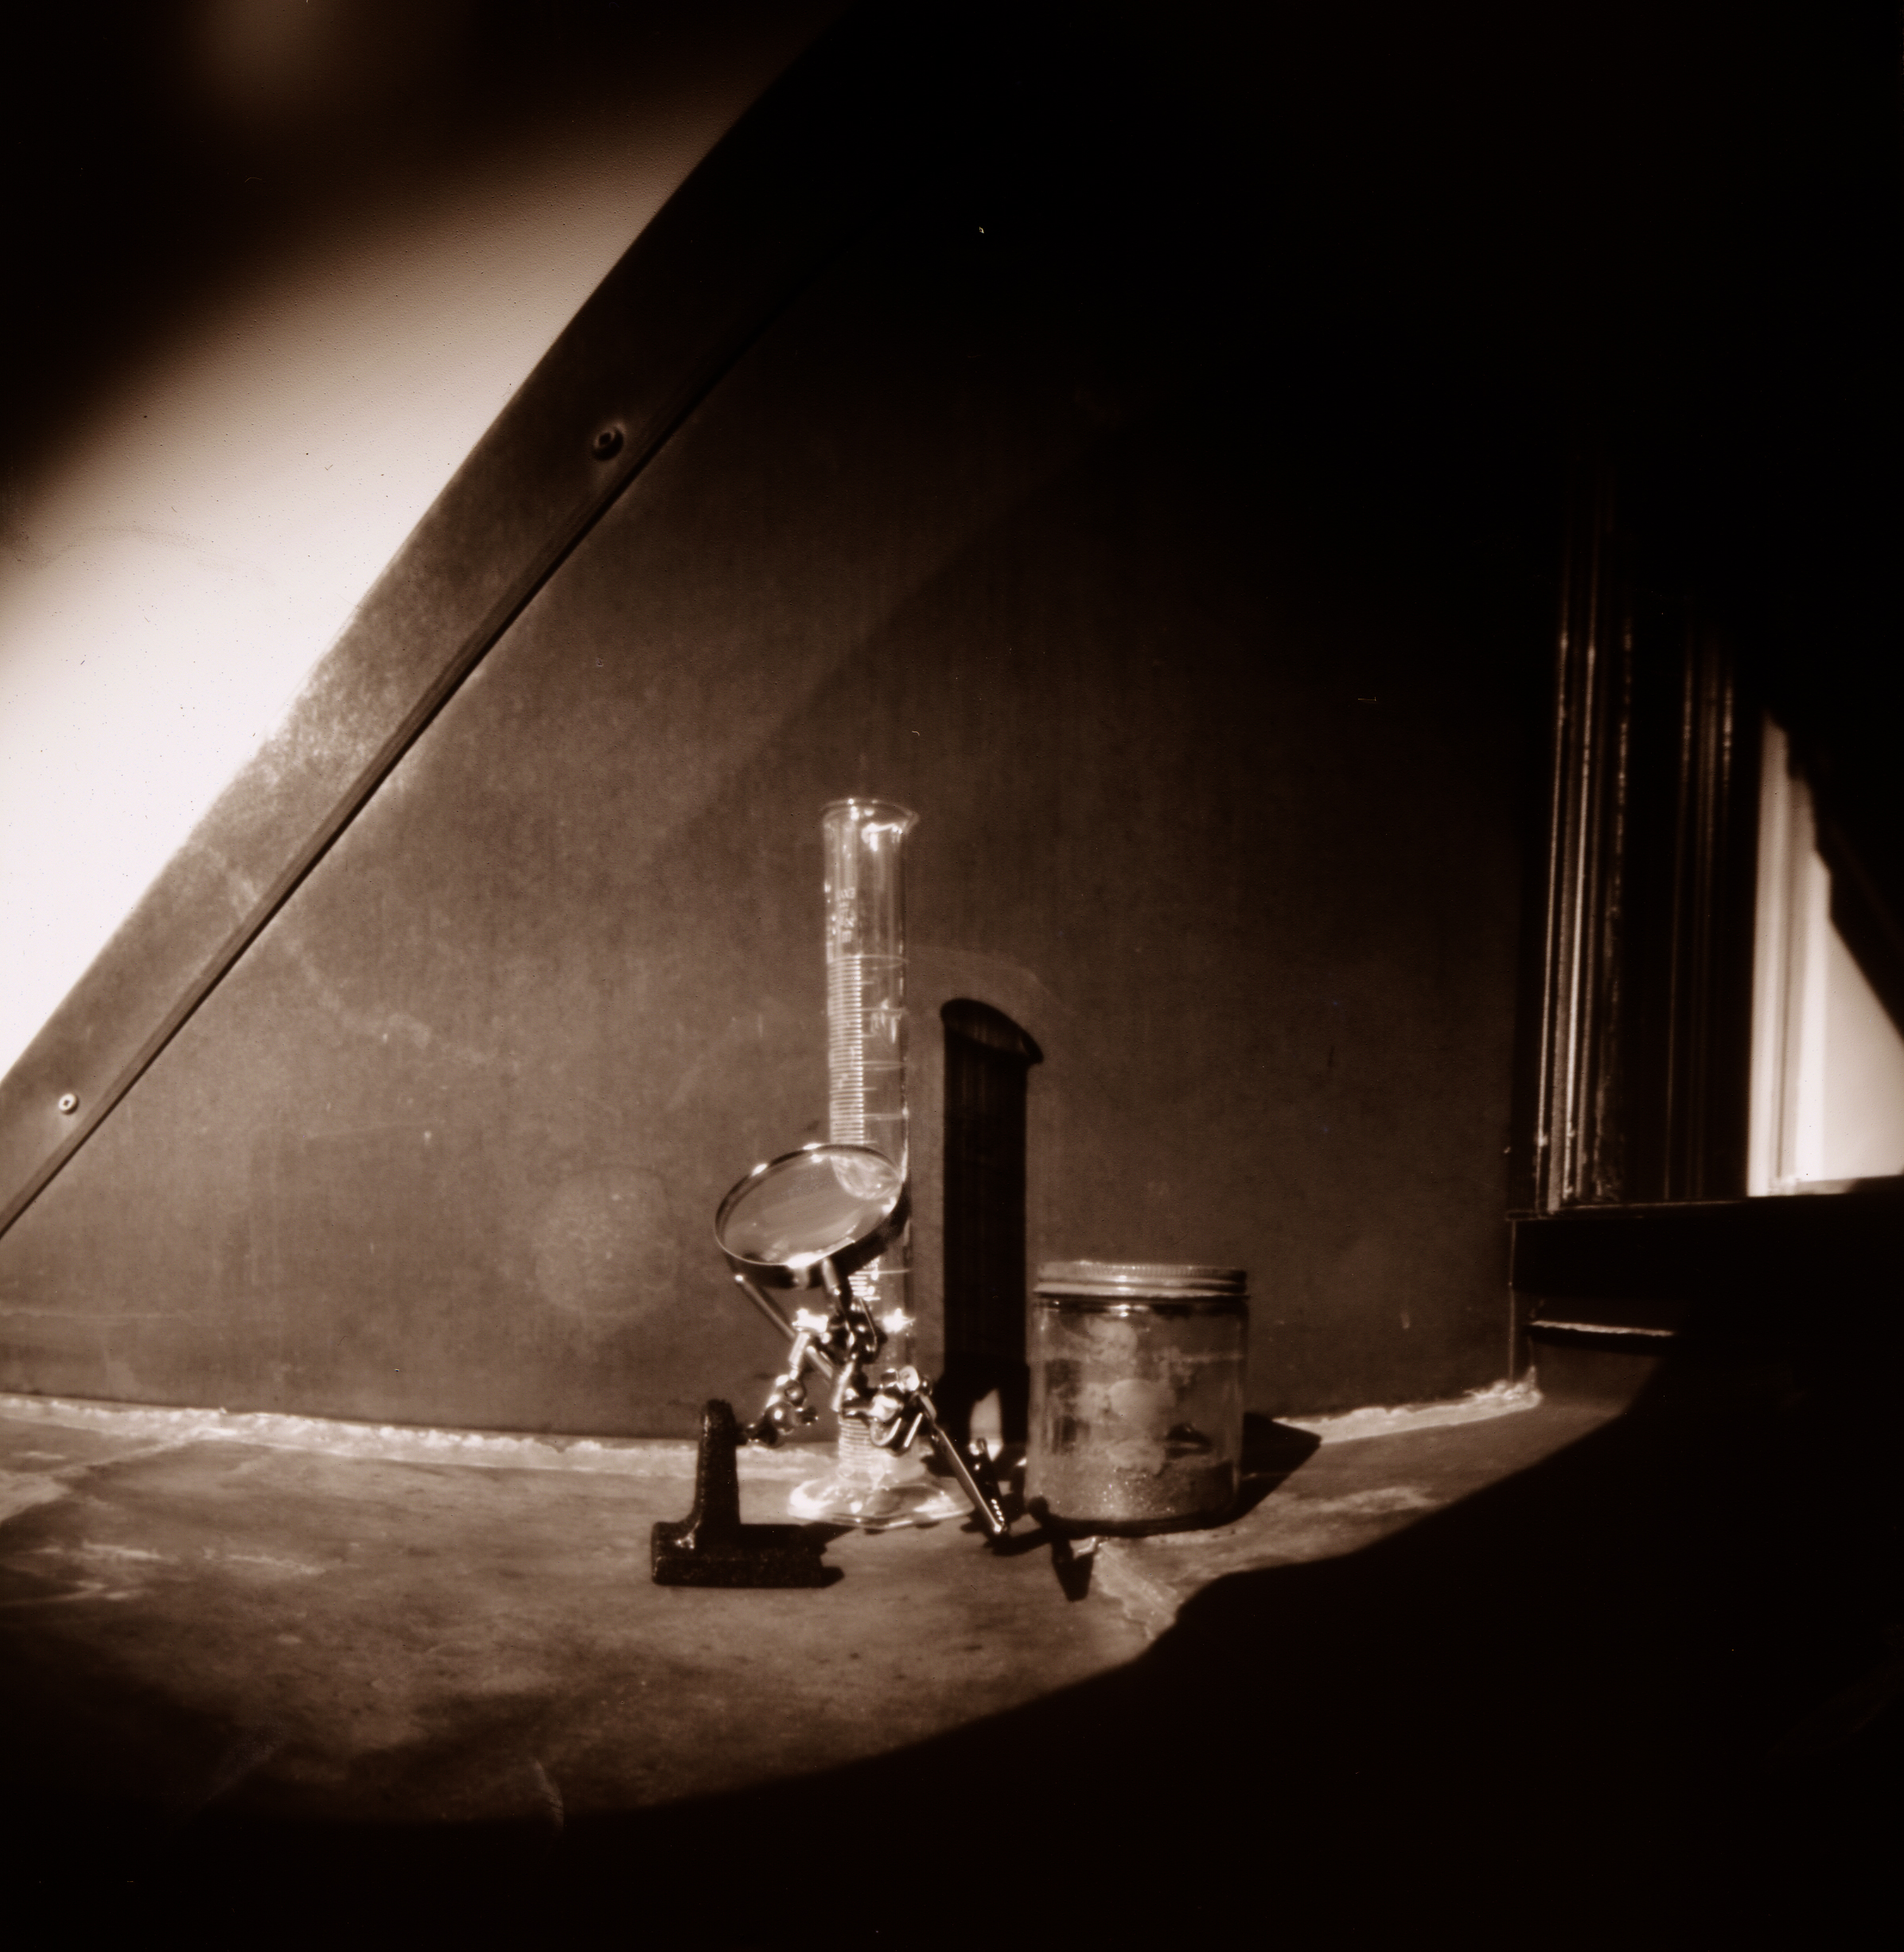 a sepia-tinted black and white pinhole camera photograph with a curvature distortion around the edges; the photo is a still life showing an elongated cylinder, an unmarked jar filled with powder, and a magnifying glass on an adjustable stand; the items are arranged in the window well of a window set in the side-roof of a brownstone